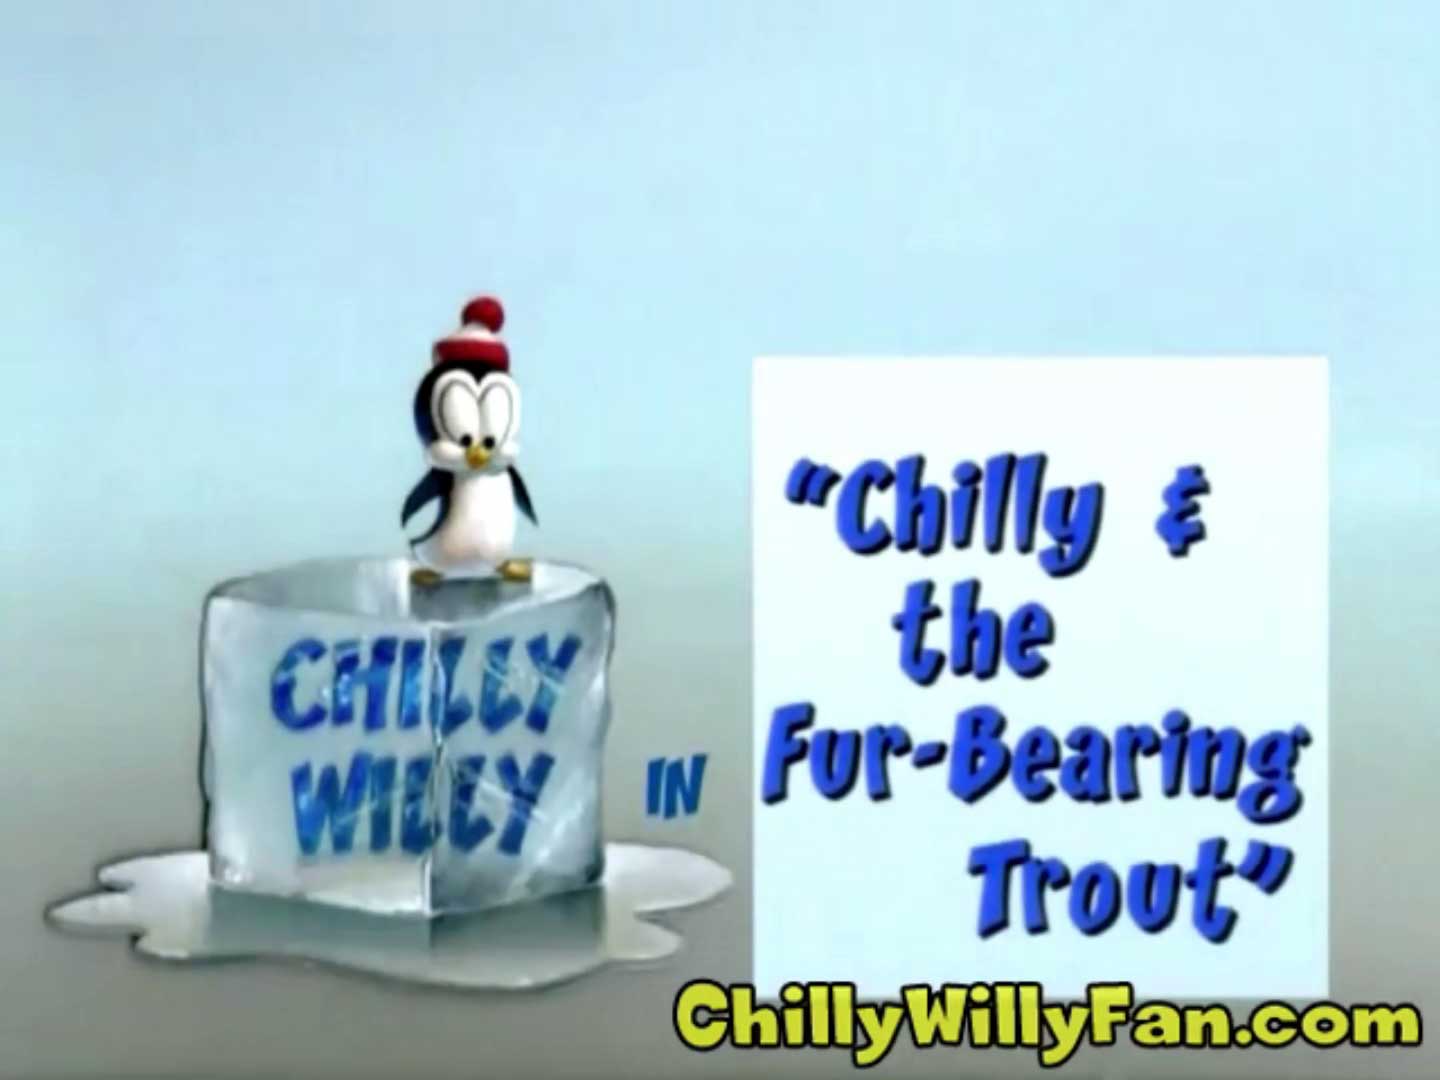 Chilly Willy - Chilly & the Fur-Bearing Trout